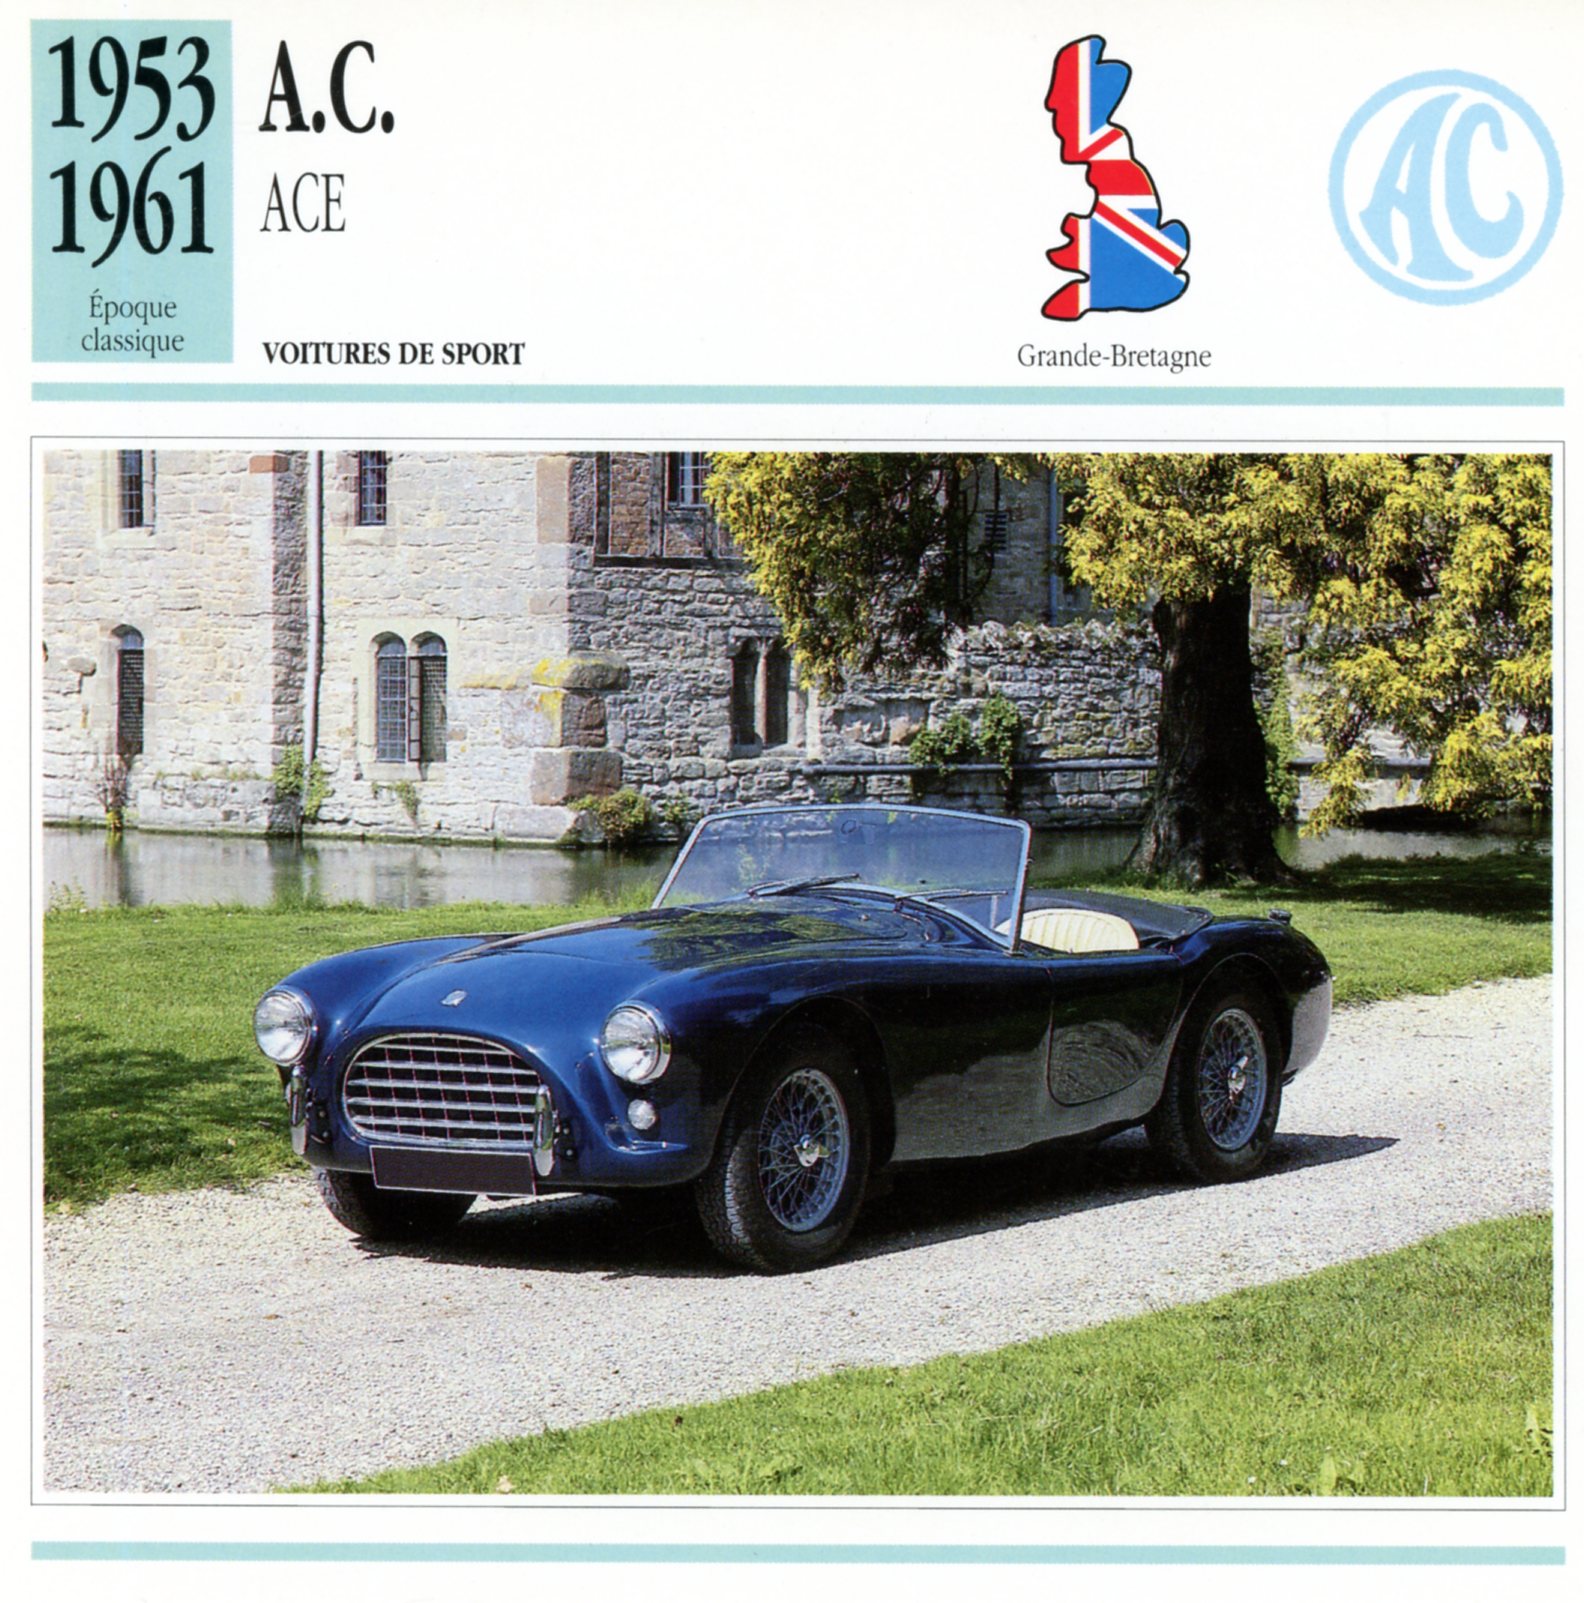 FICHE-AUTO-AC-ACE-1953-1961-LEMASTERBROCKERS-CARS-CARD